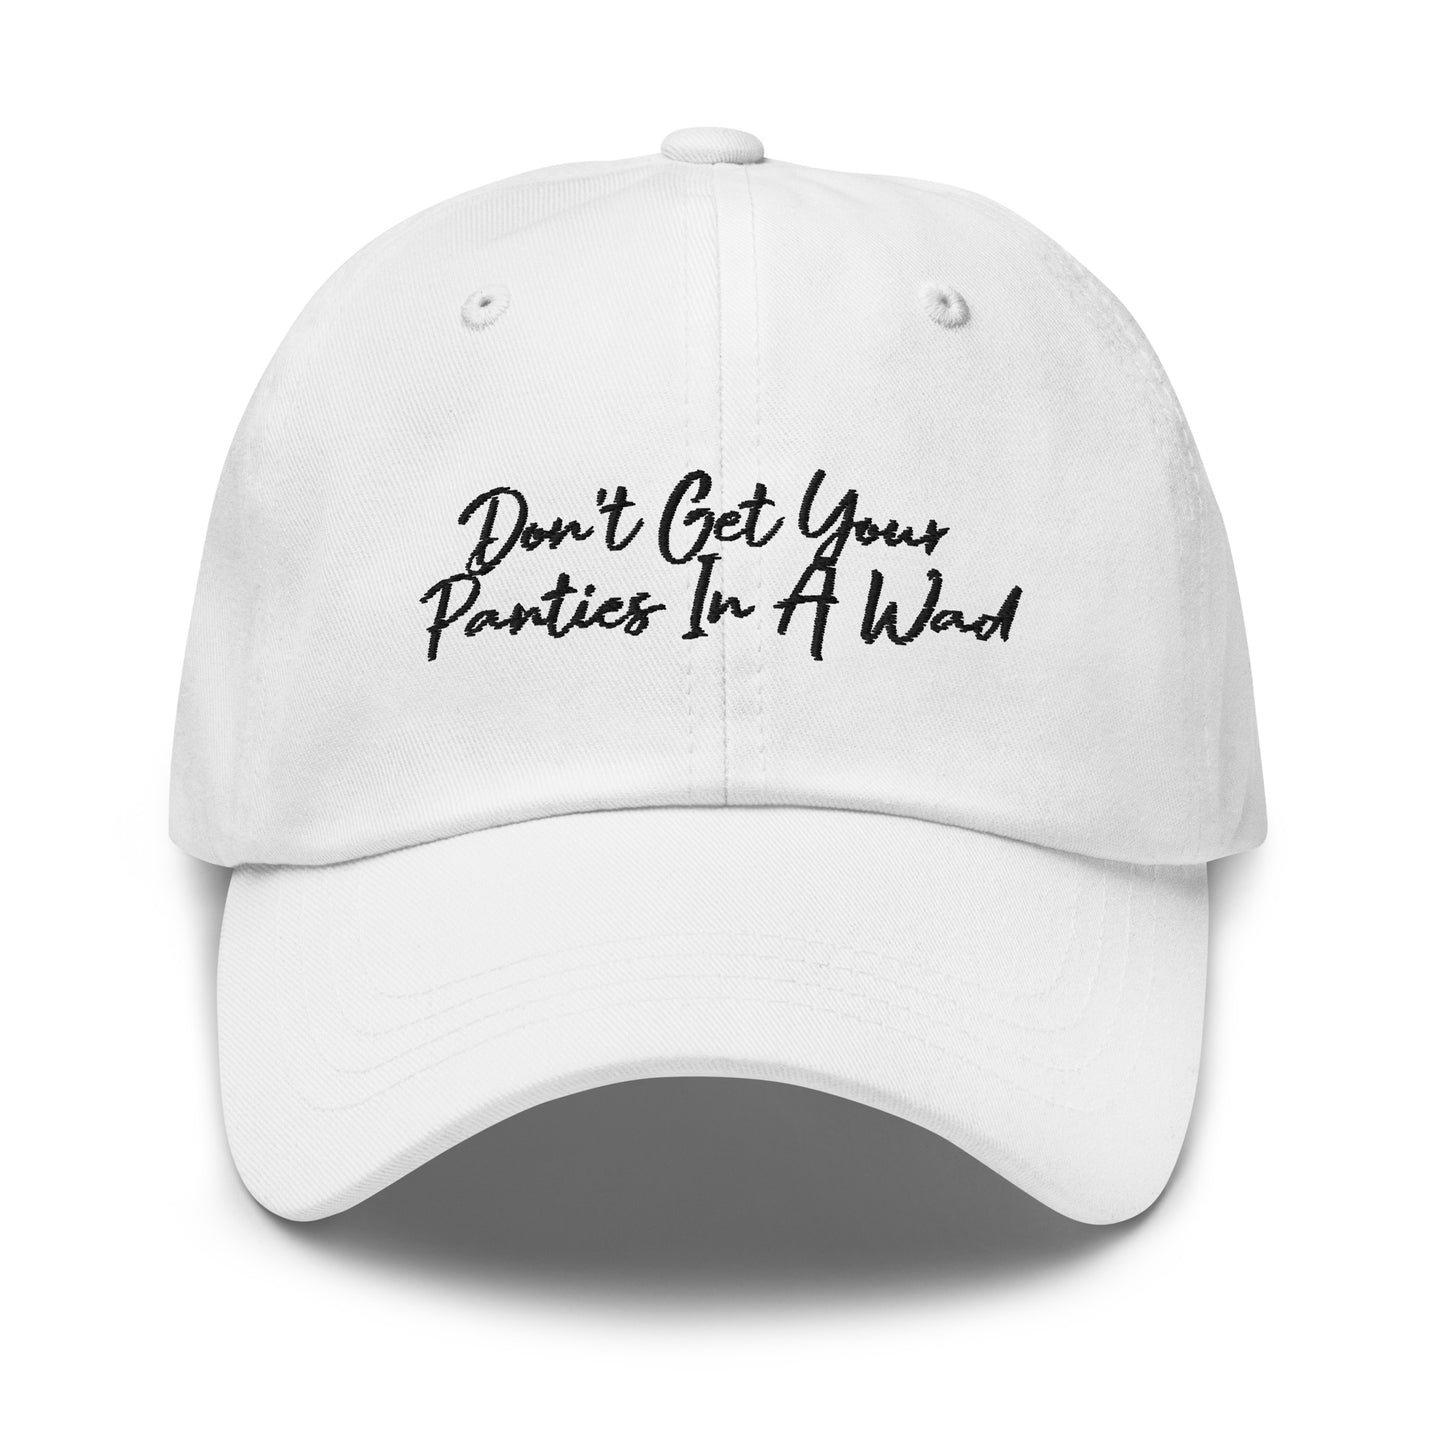 "Panties in a Wad" Dad hat